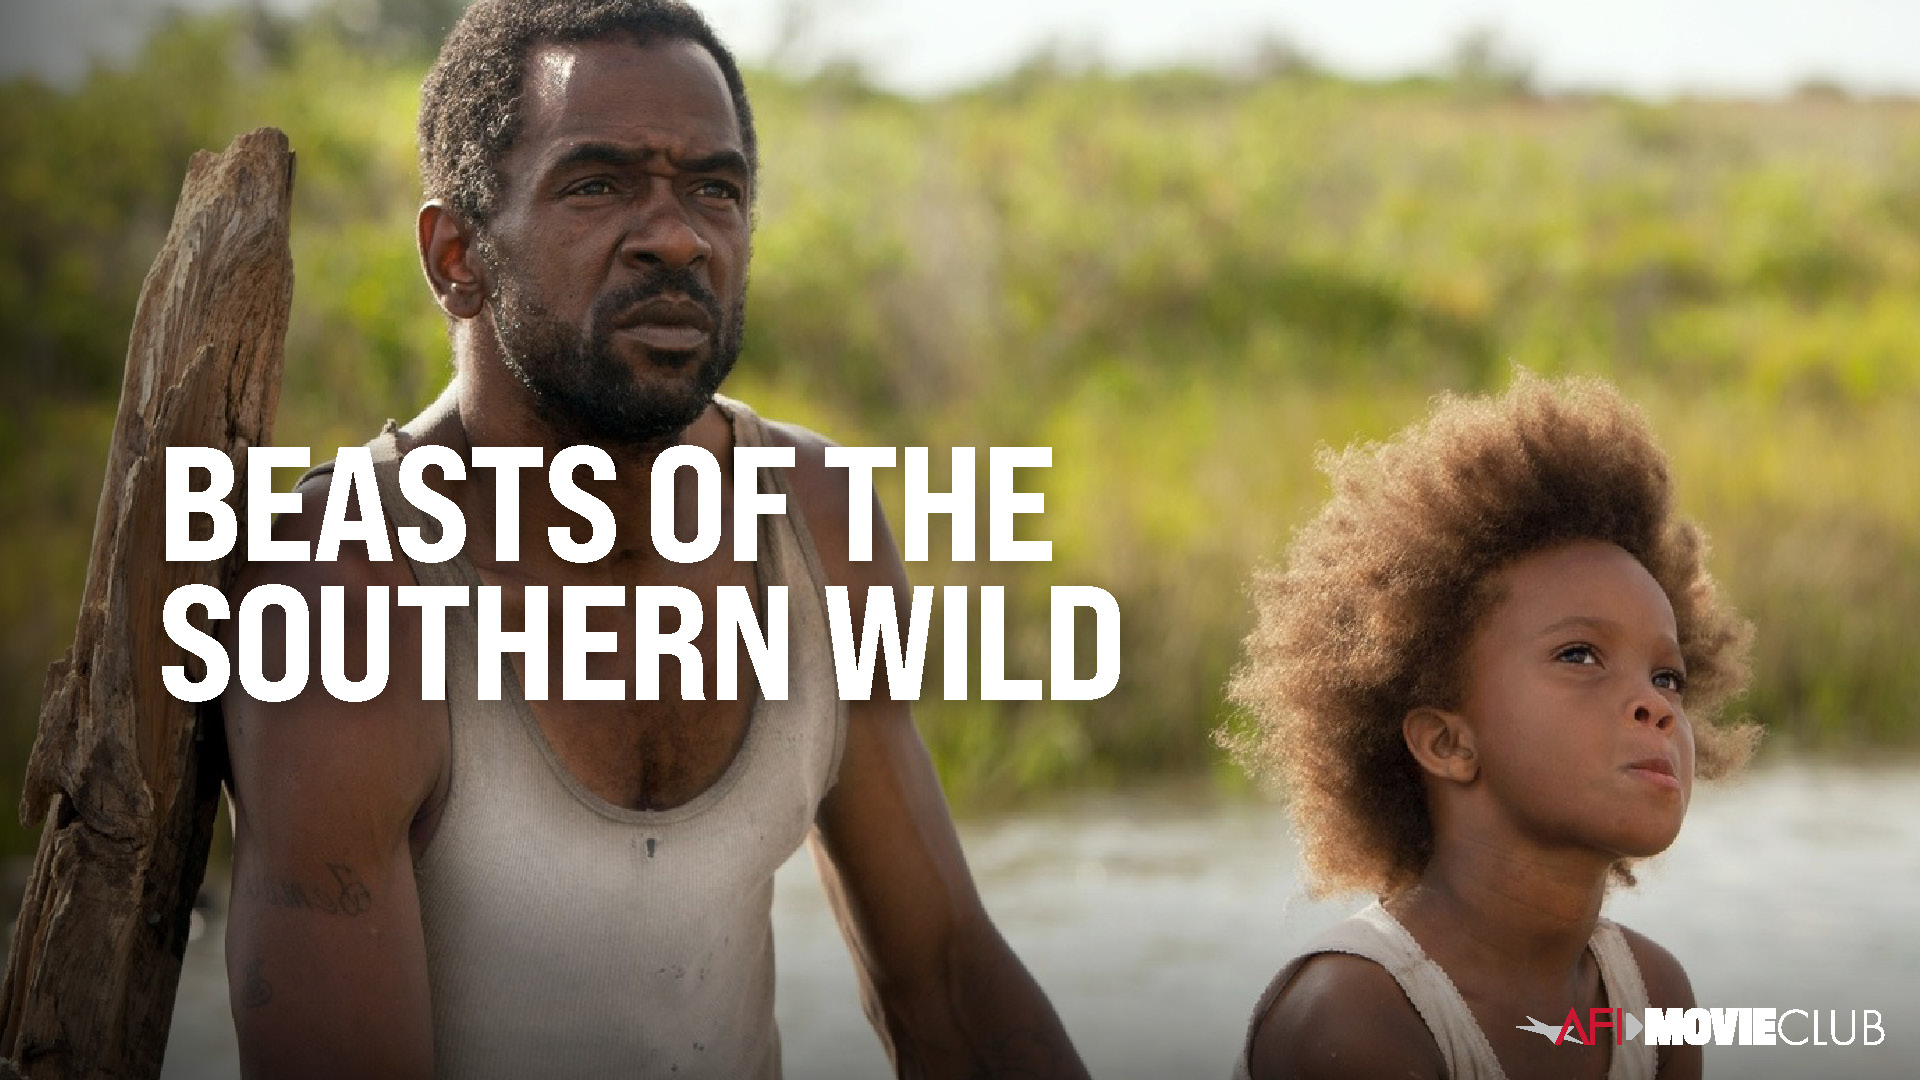 Beasts of the Southern Wild - Quvenzhané Wallis and Dwight Henry